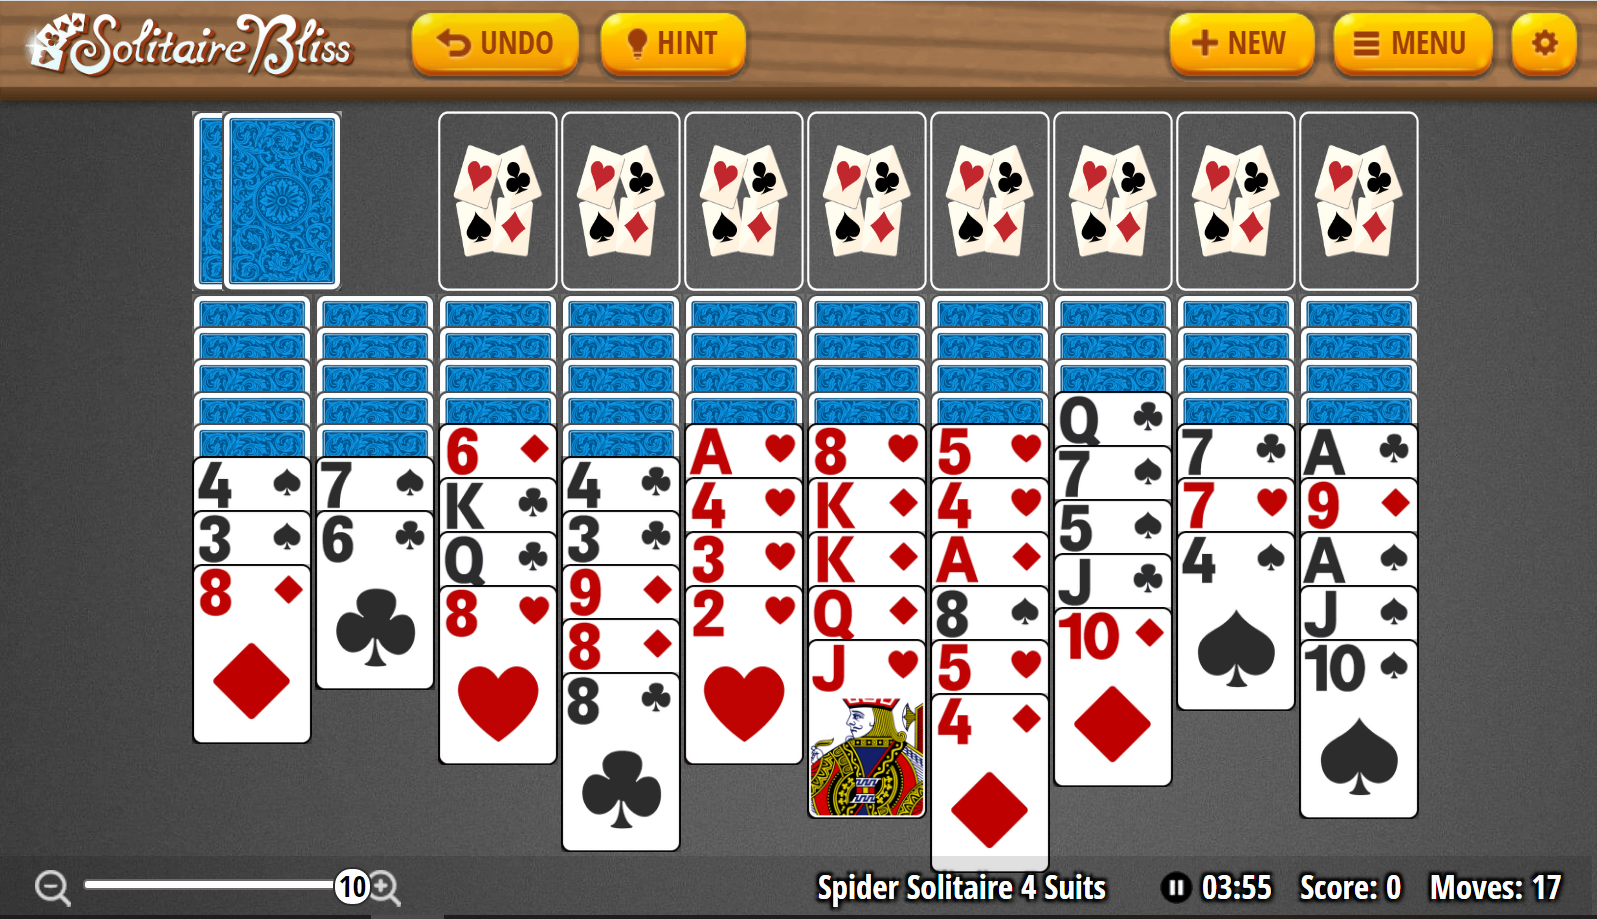 Spider Solitaire (4 Suits) - Play Online [100% Free]